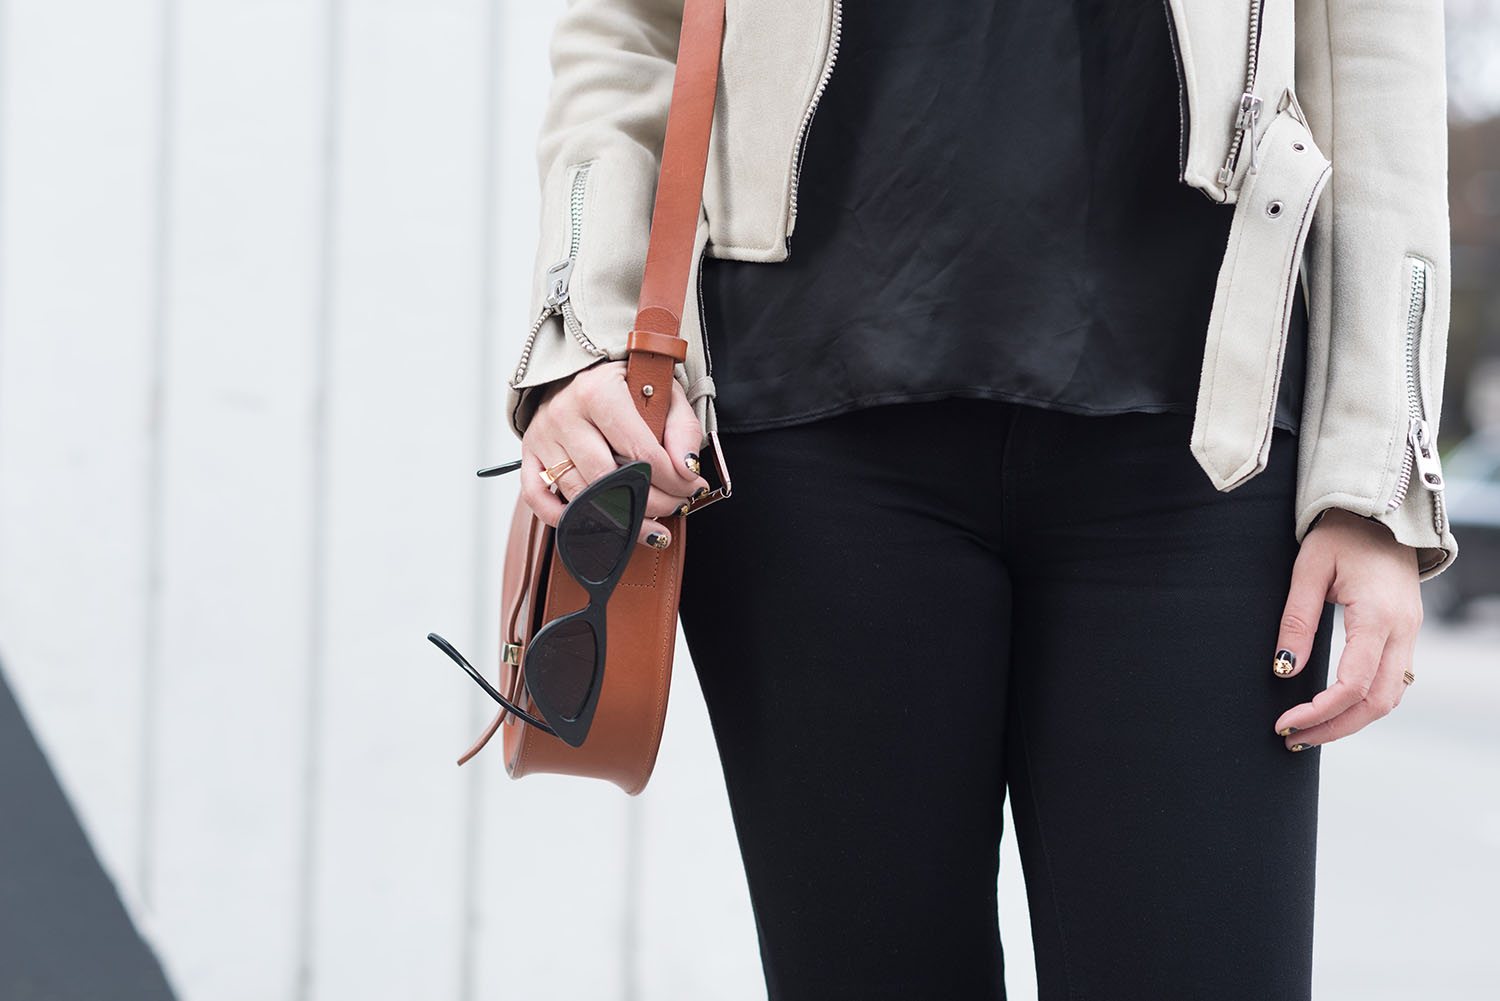 Outfit details on fashion blogger Cee Fardoe of Coco & Vera, including Zara cat eye sunglasses and a Sezane Claude bag